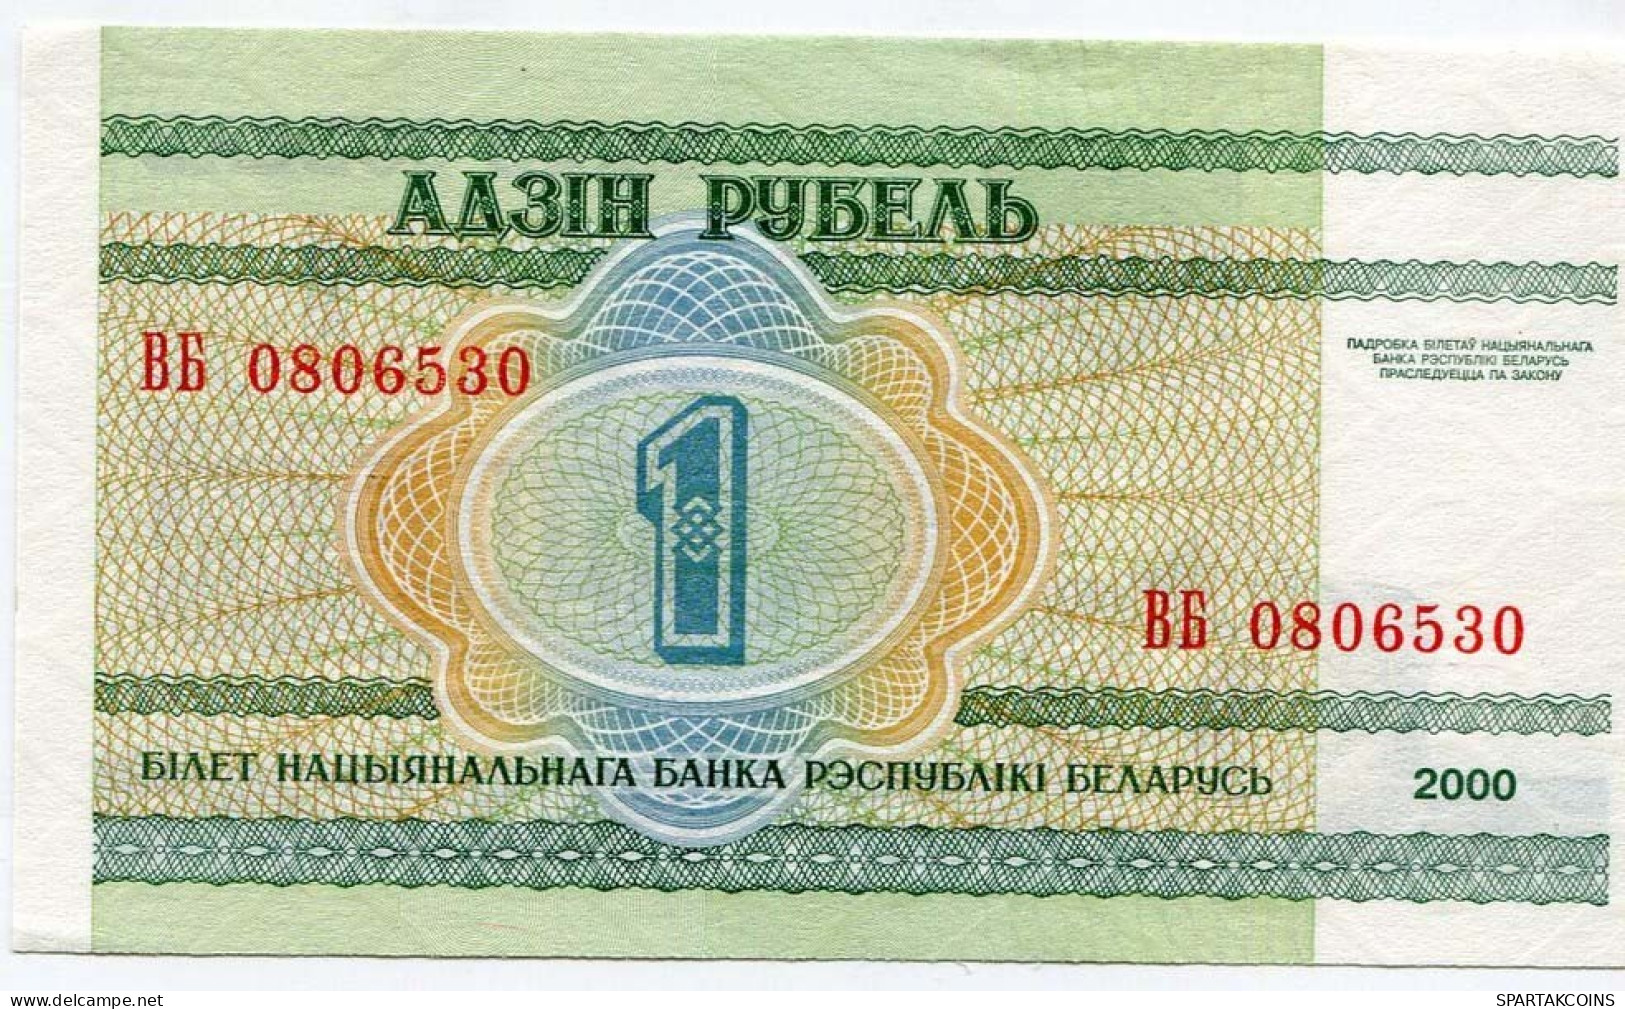 BELARUS 1 RUBLES 2000 National Academy Of Sciences Of Belarus Paper Money Banknote #P10198.V - [11] Local Banknote Issues